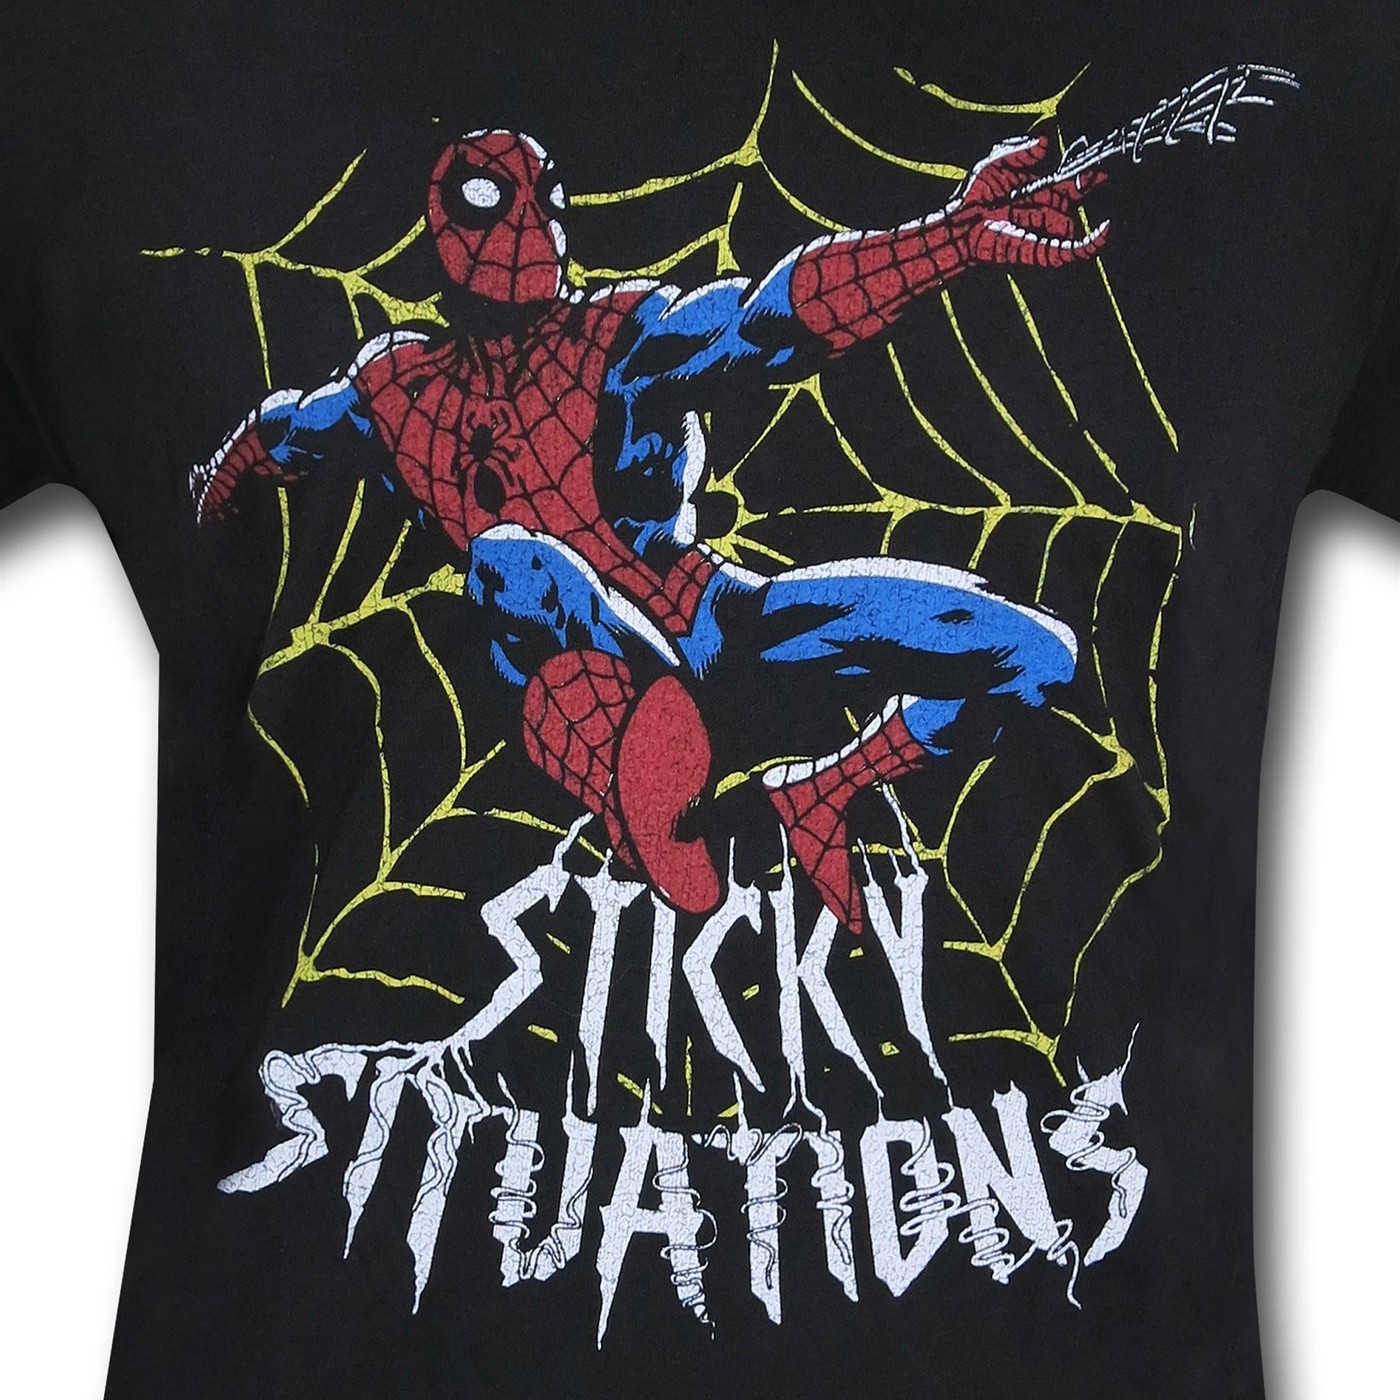 Spiderman Sticky Situations Junk Food T-Shirt